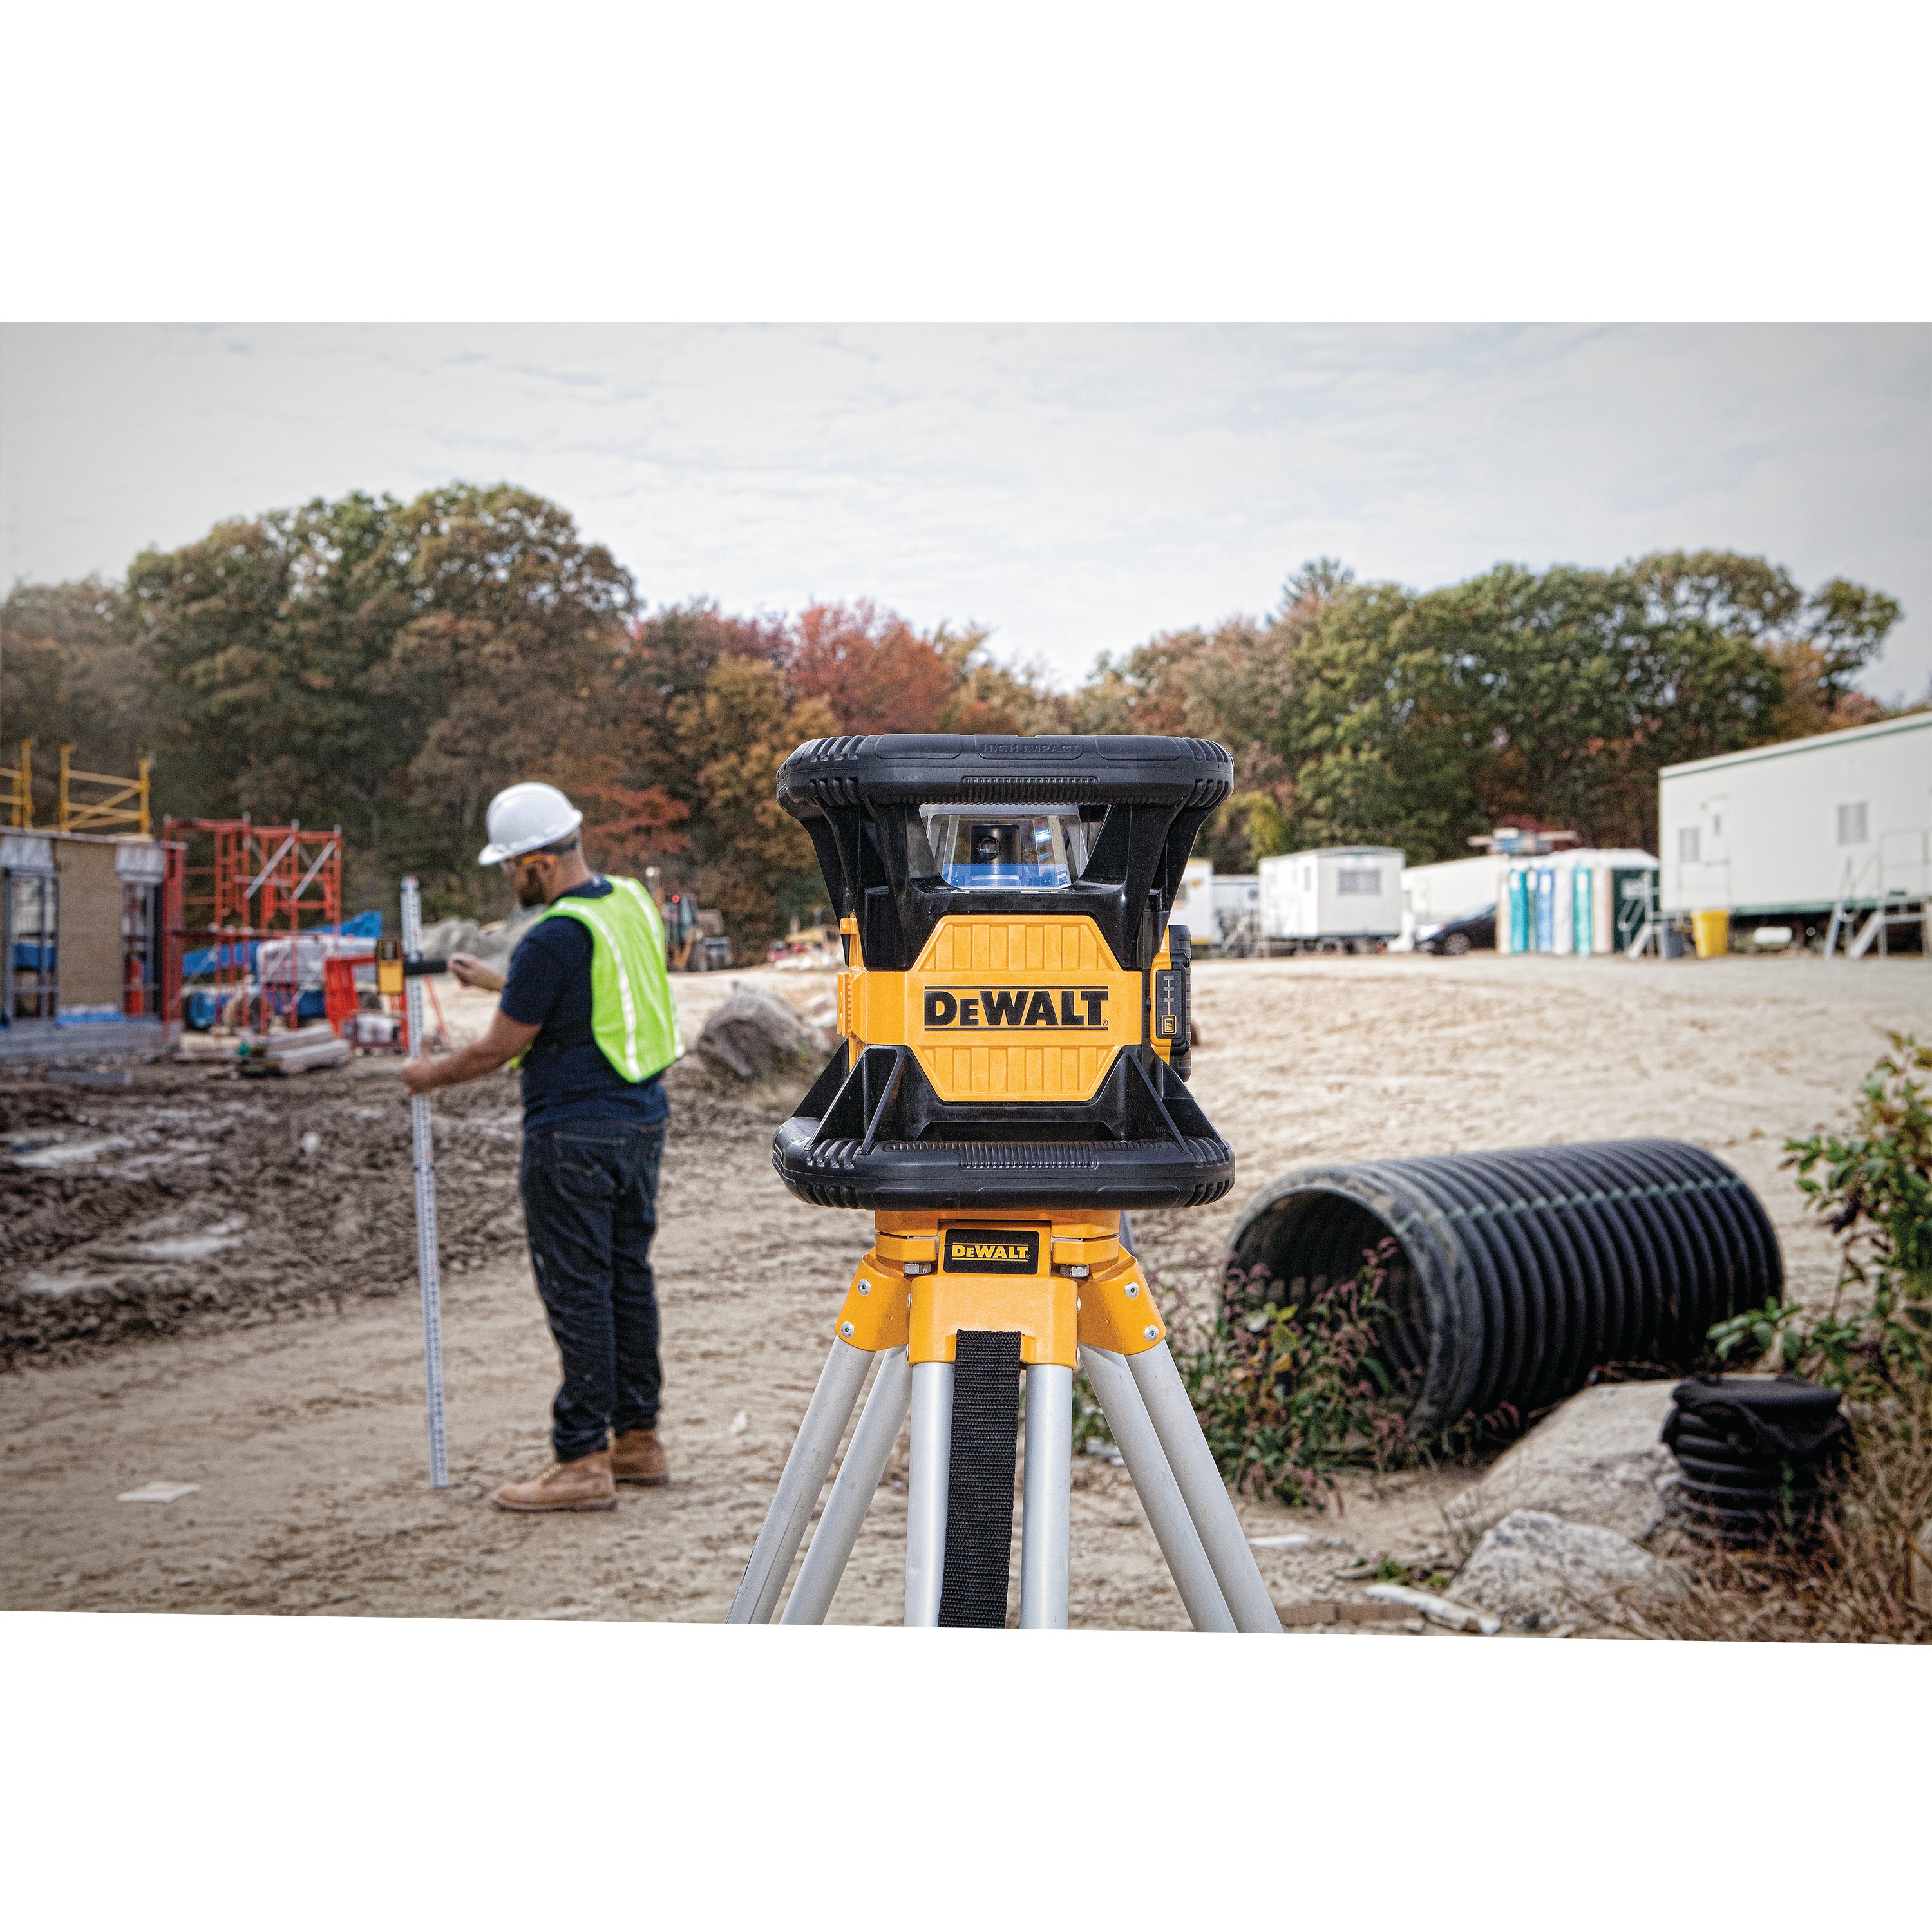 Red rotary tough laser mounted on a tripod being used at a construction site.